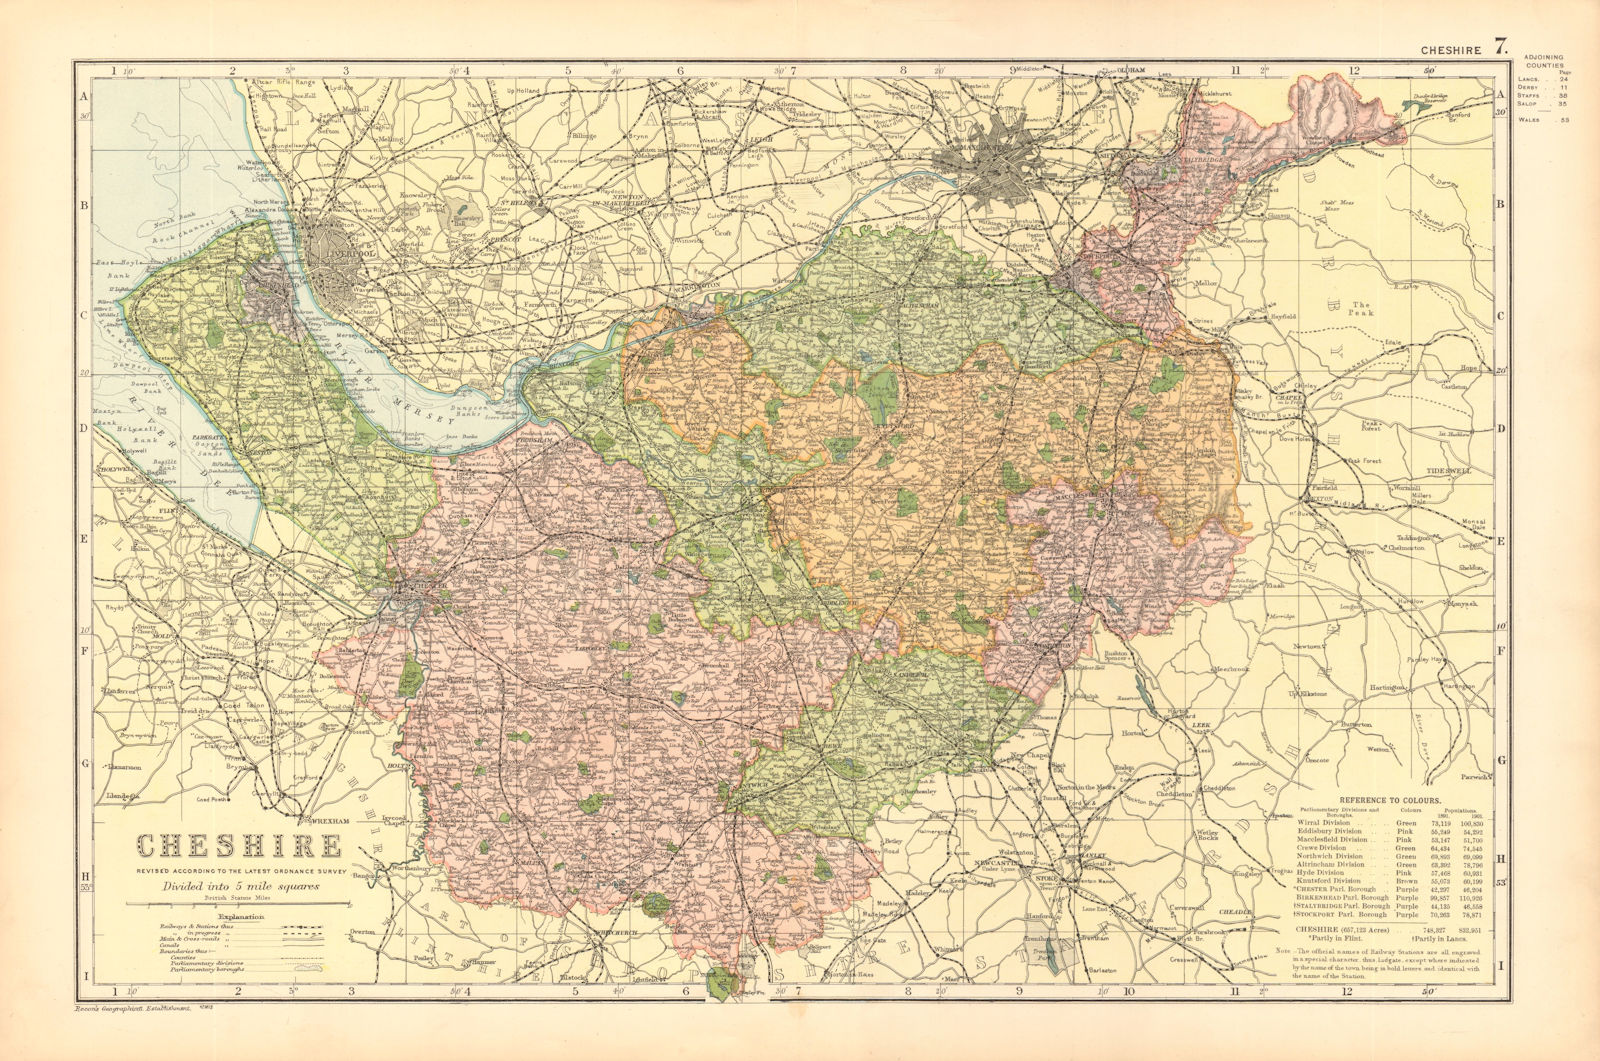 Associate Product CHESHIRE. Showing Parliamentary divisions, boroughs & parks. BACON 1904 map